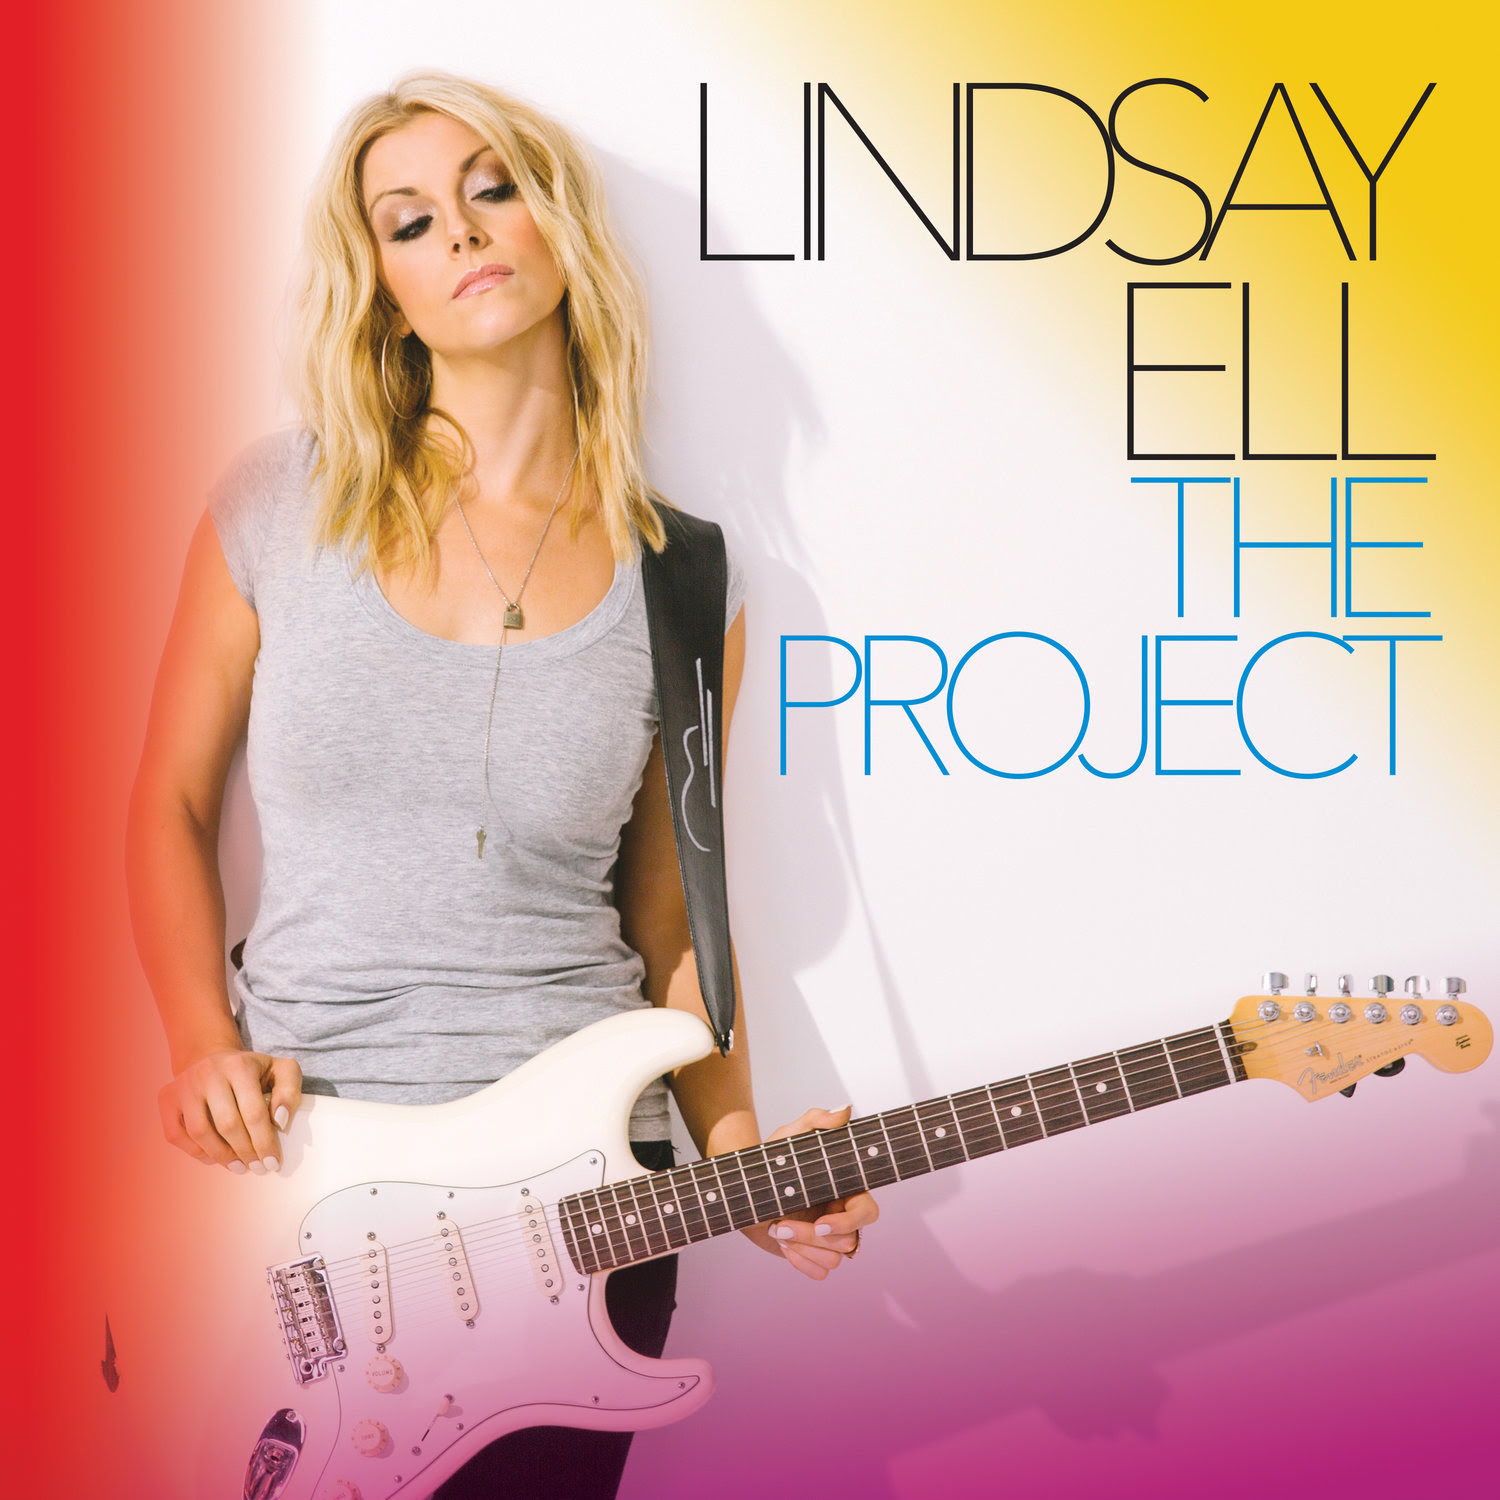 Lindsay Ell Reveals Tracklisting for Debut Album “The Project”